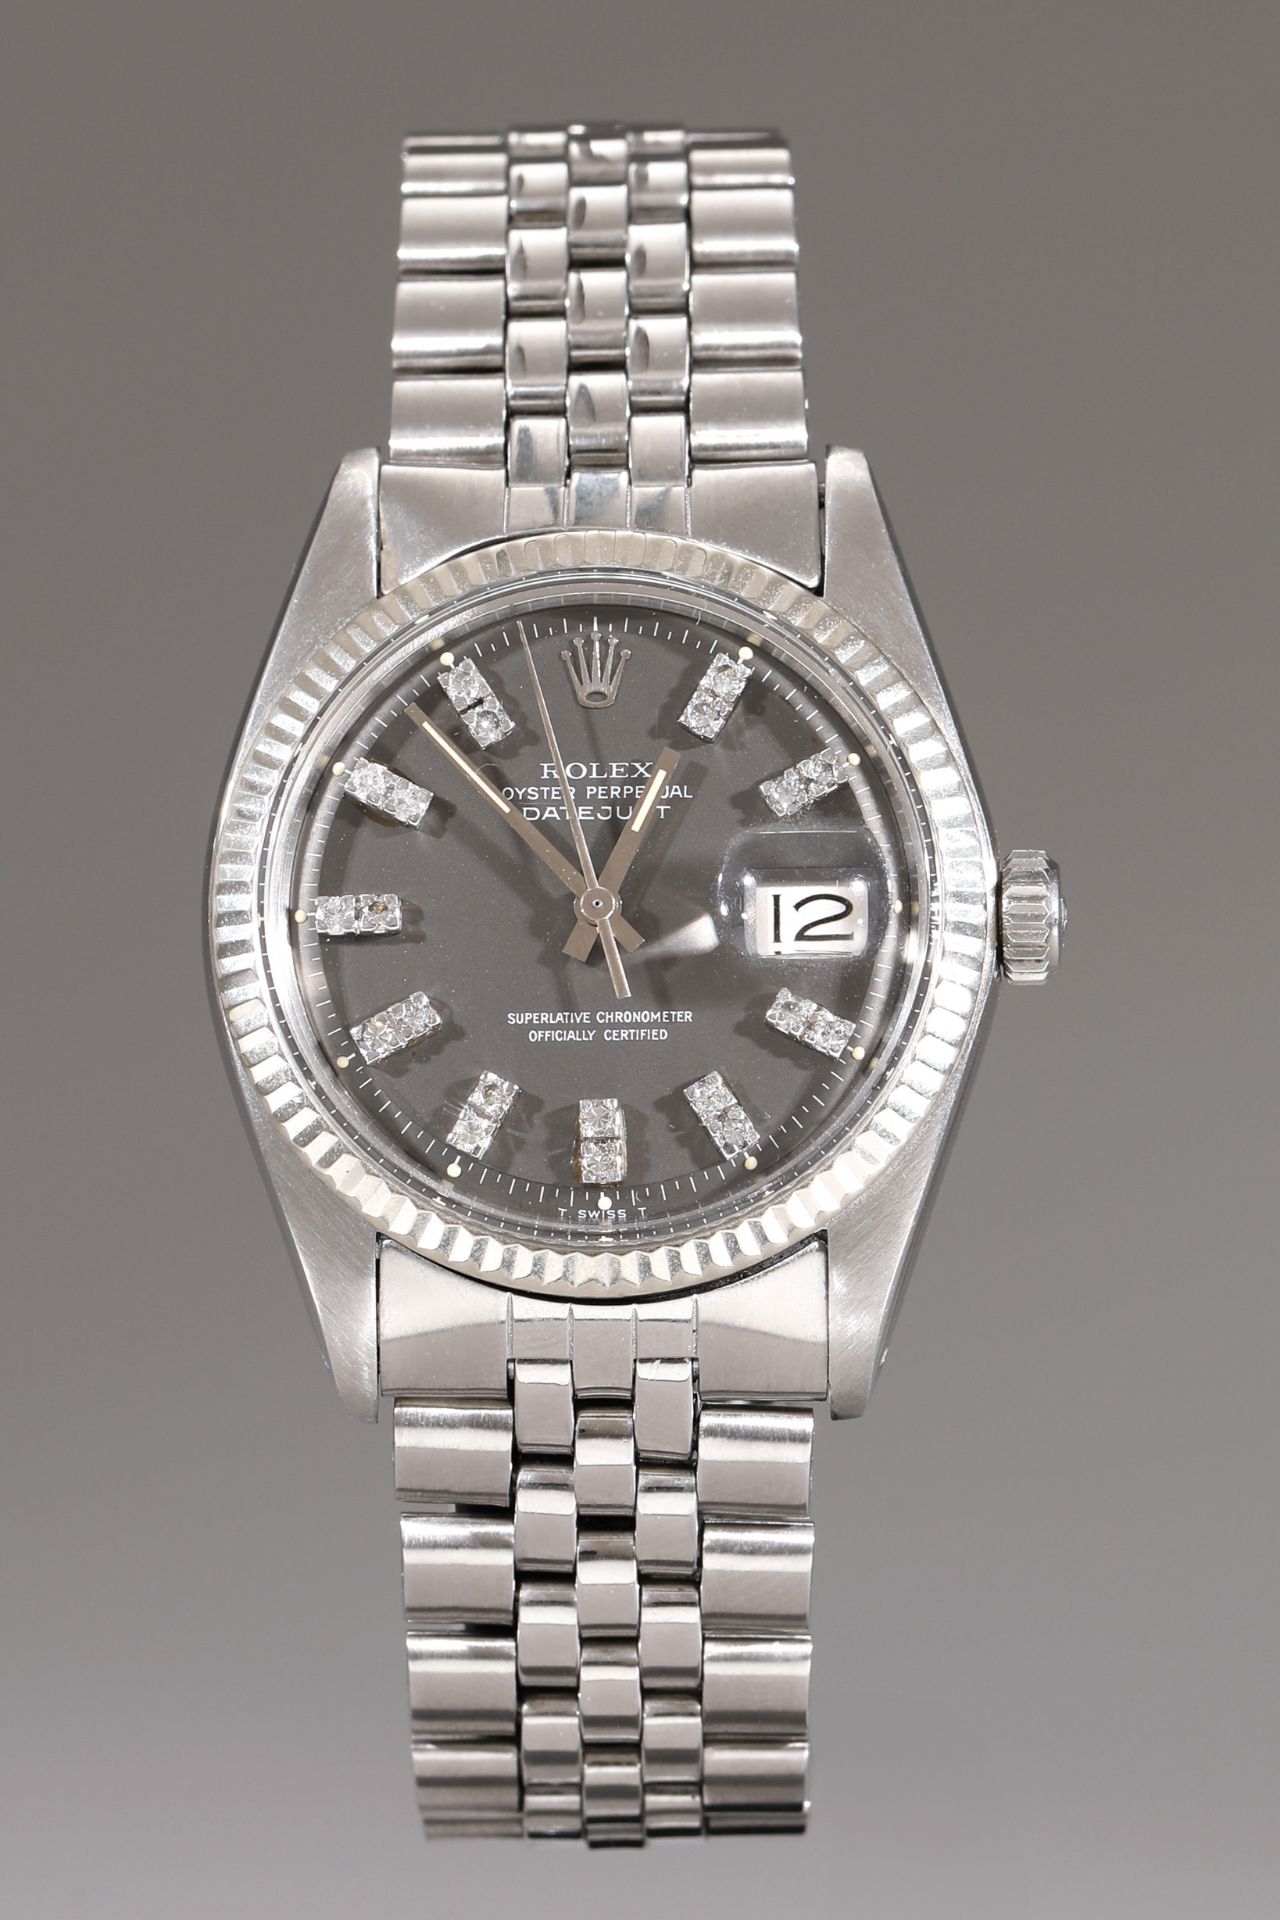 Rolex Oyster Perpetual Datejust. Ref.1601 automatic men's watch